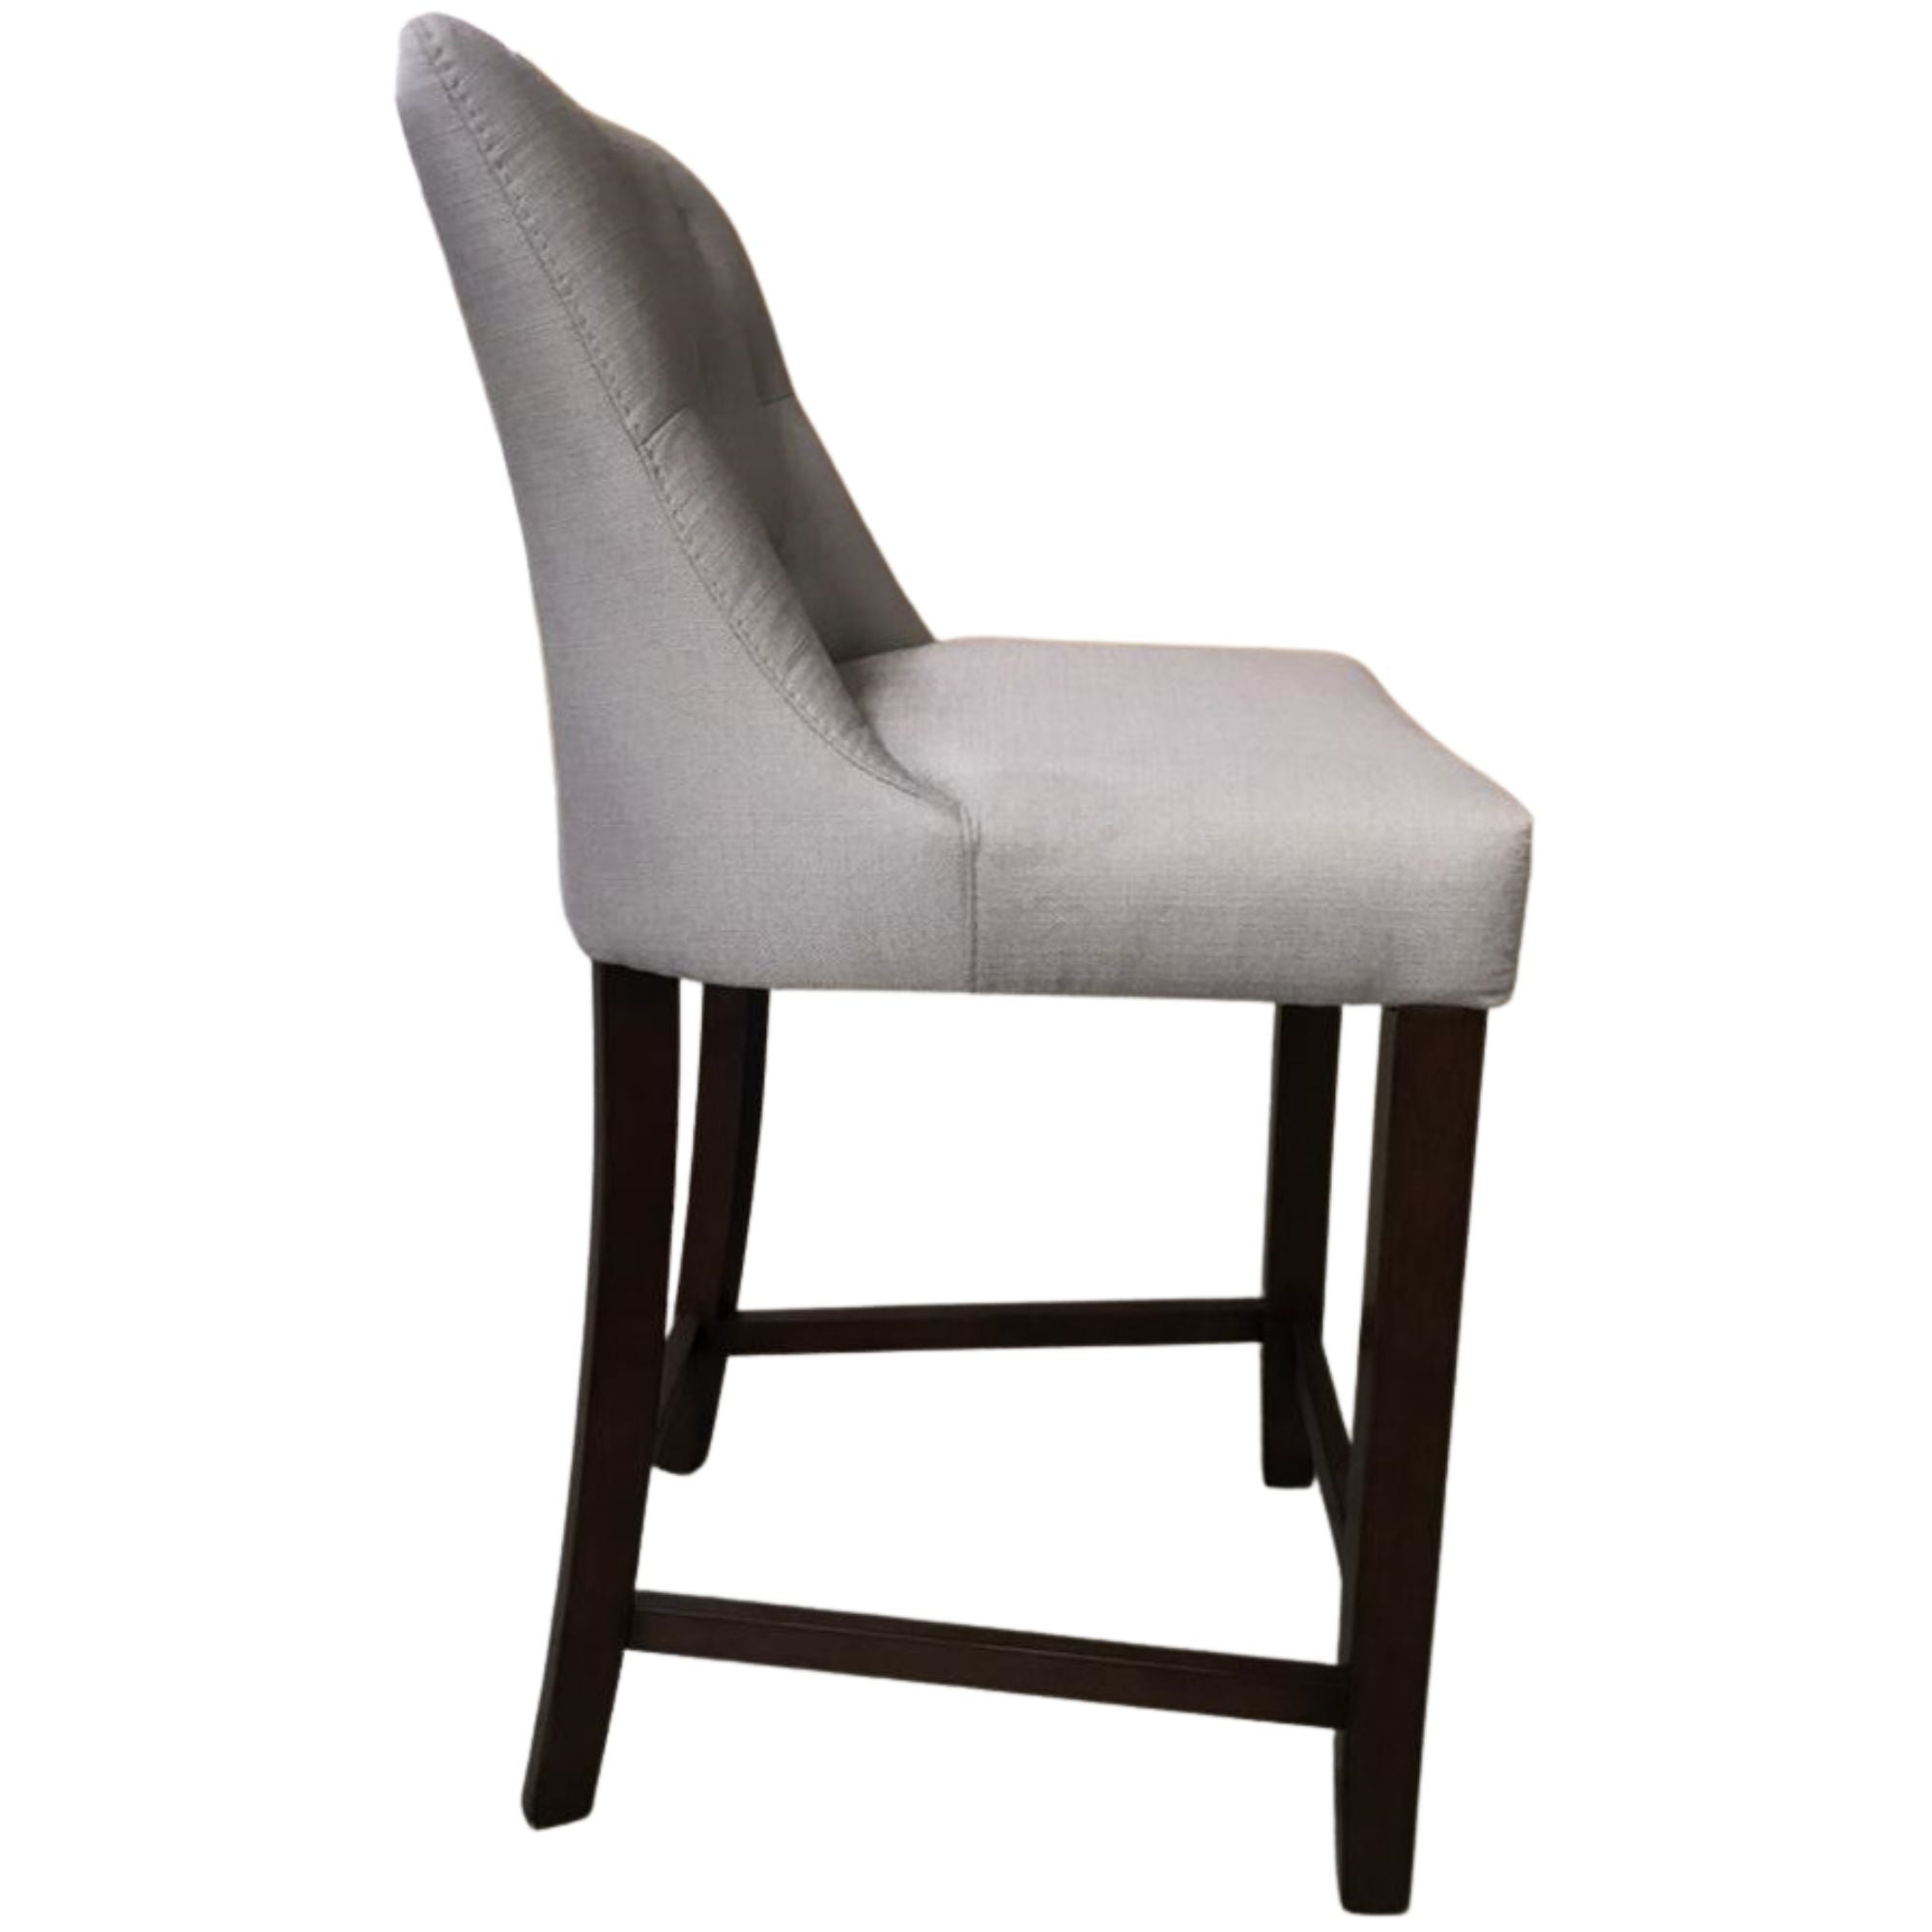 Luxurious French Provincial Solid Timber Dining Chair Bar Stool with High-Quality